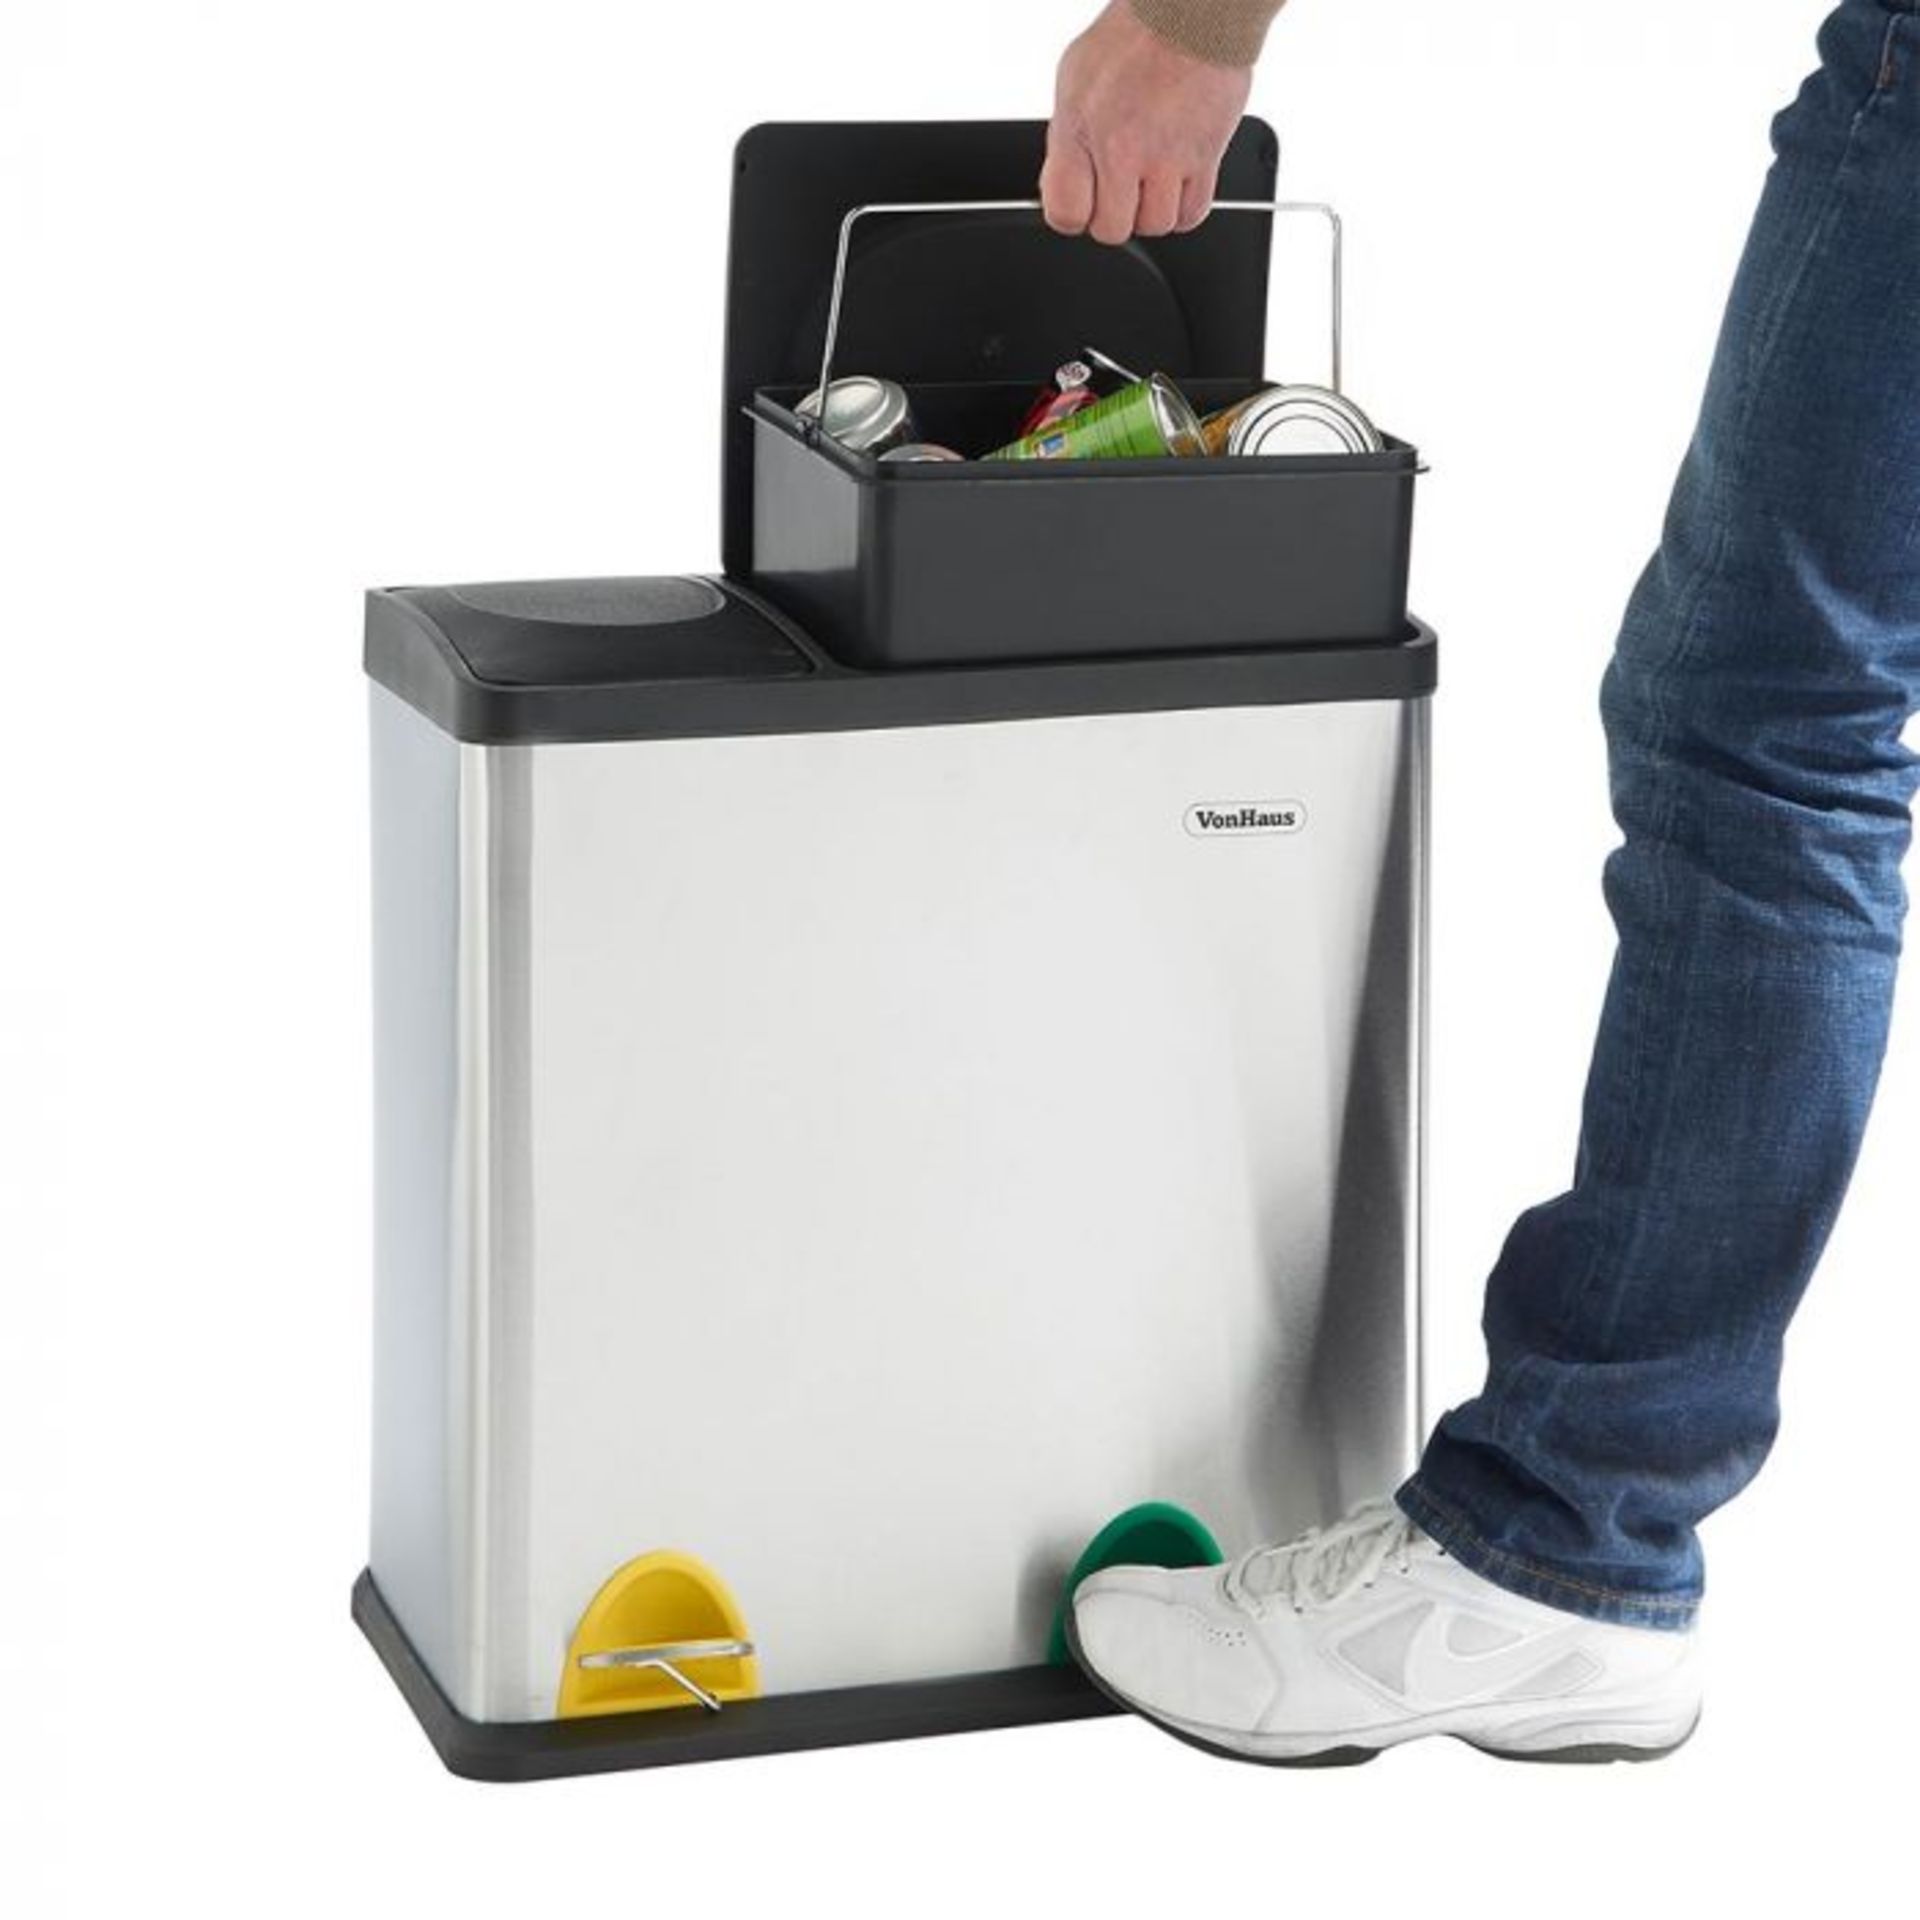 (S334) 36L 2 in 1 Recycling Bin Streamline your recycling routine! Suitable for general househ... - Image 3 of 3